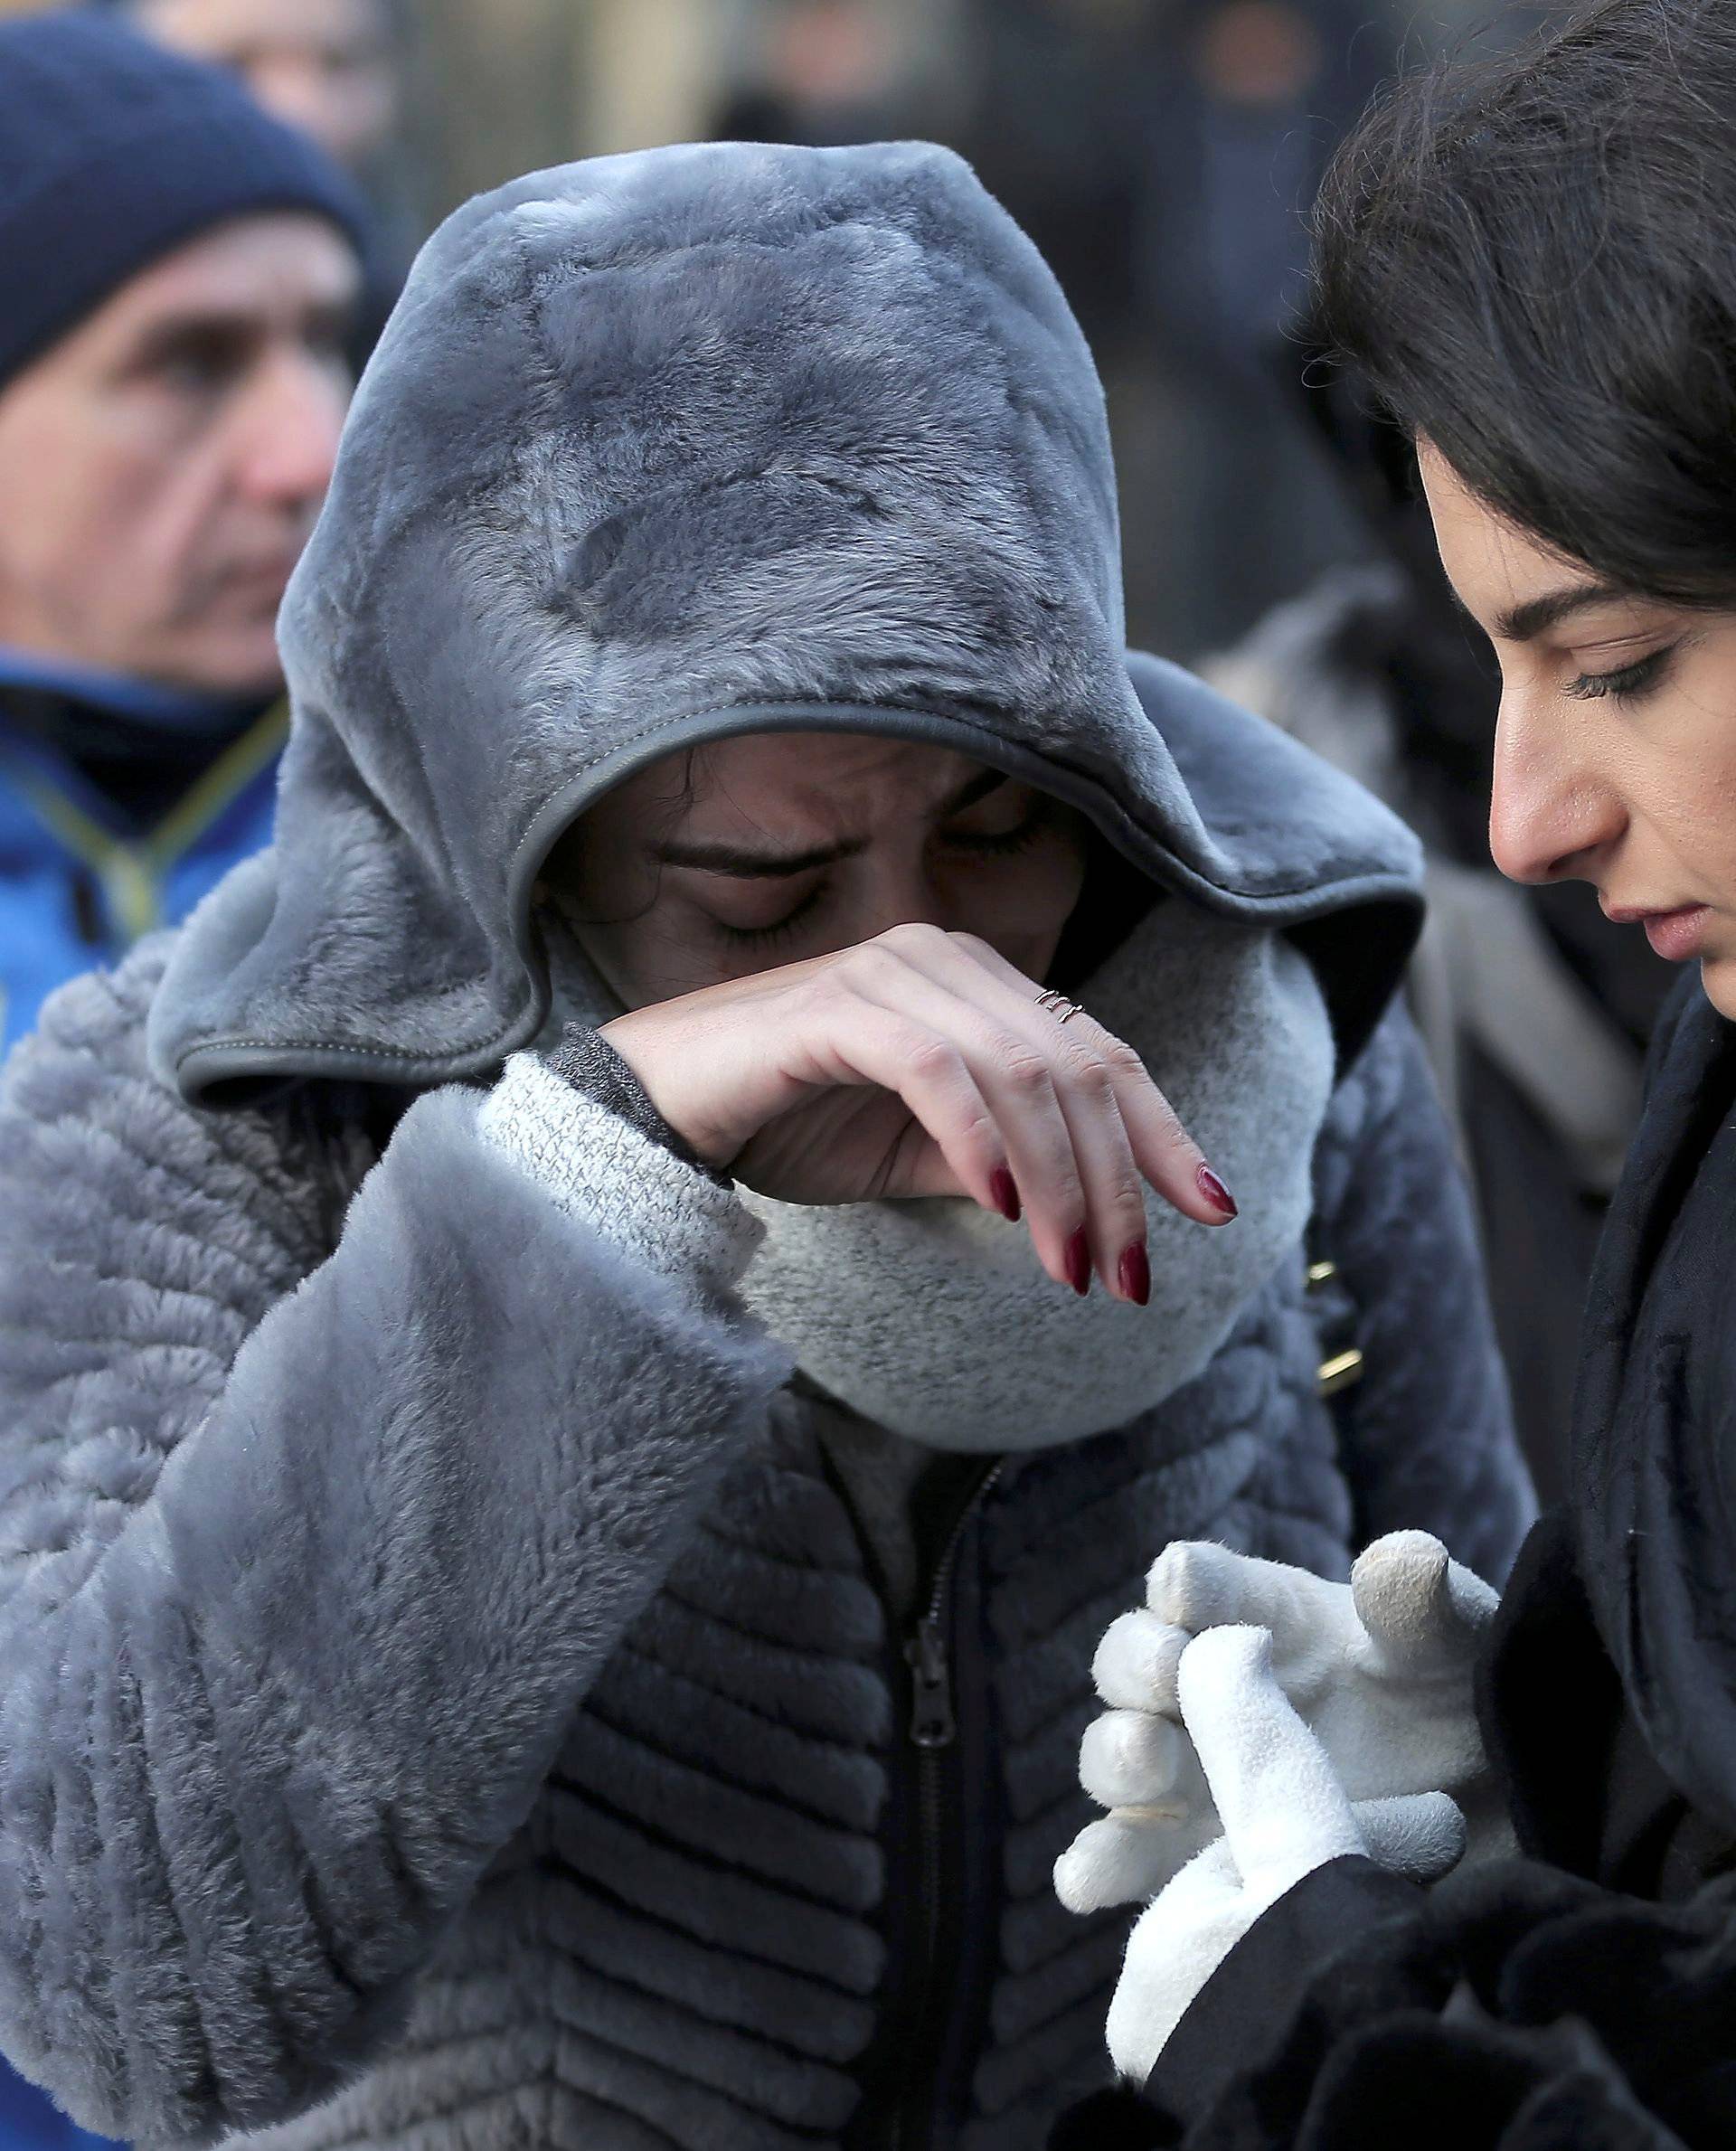 Women who survived an attack by a gunman, react outisde the Reina nightclub by the Bosphorus, in Istanbul